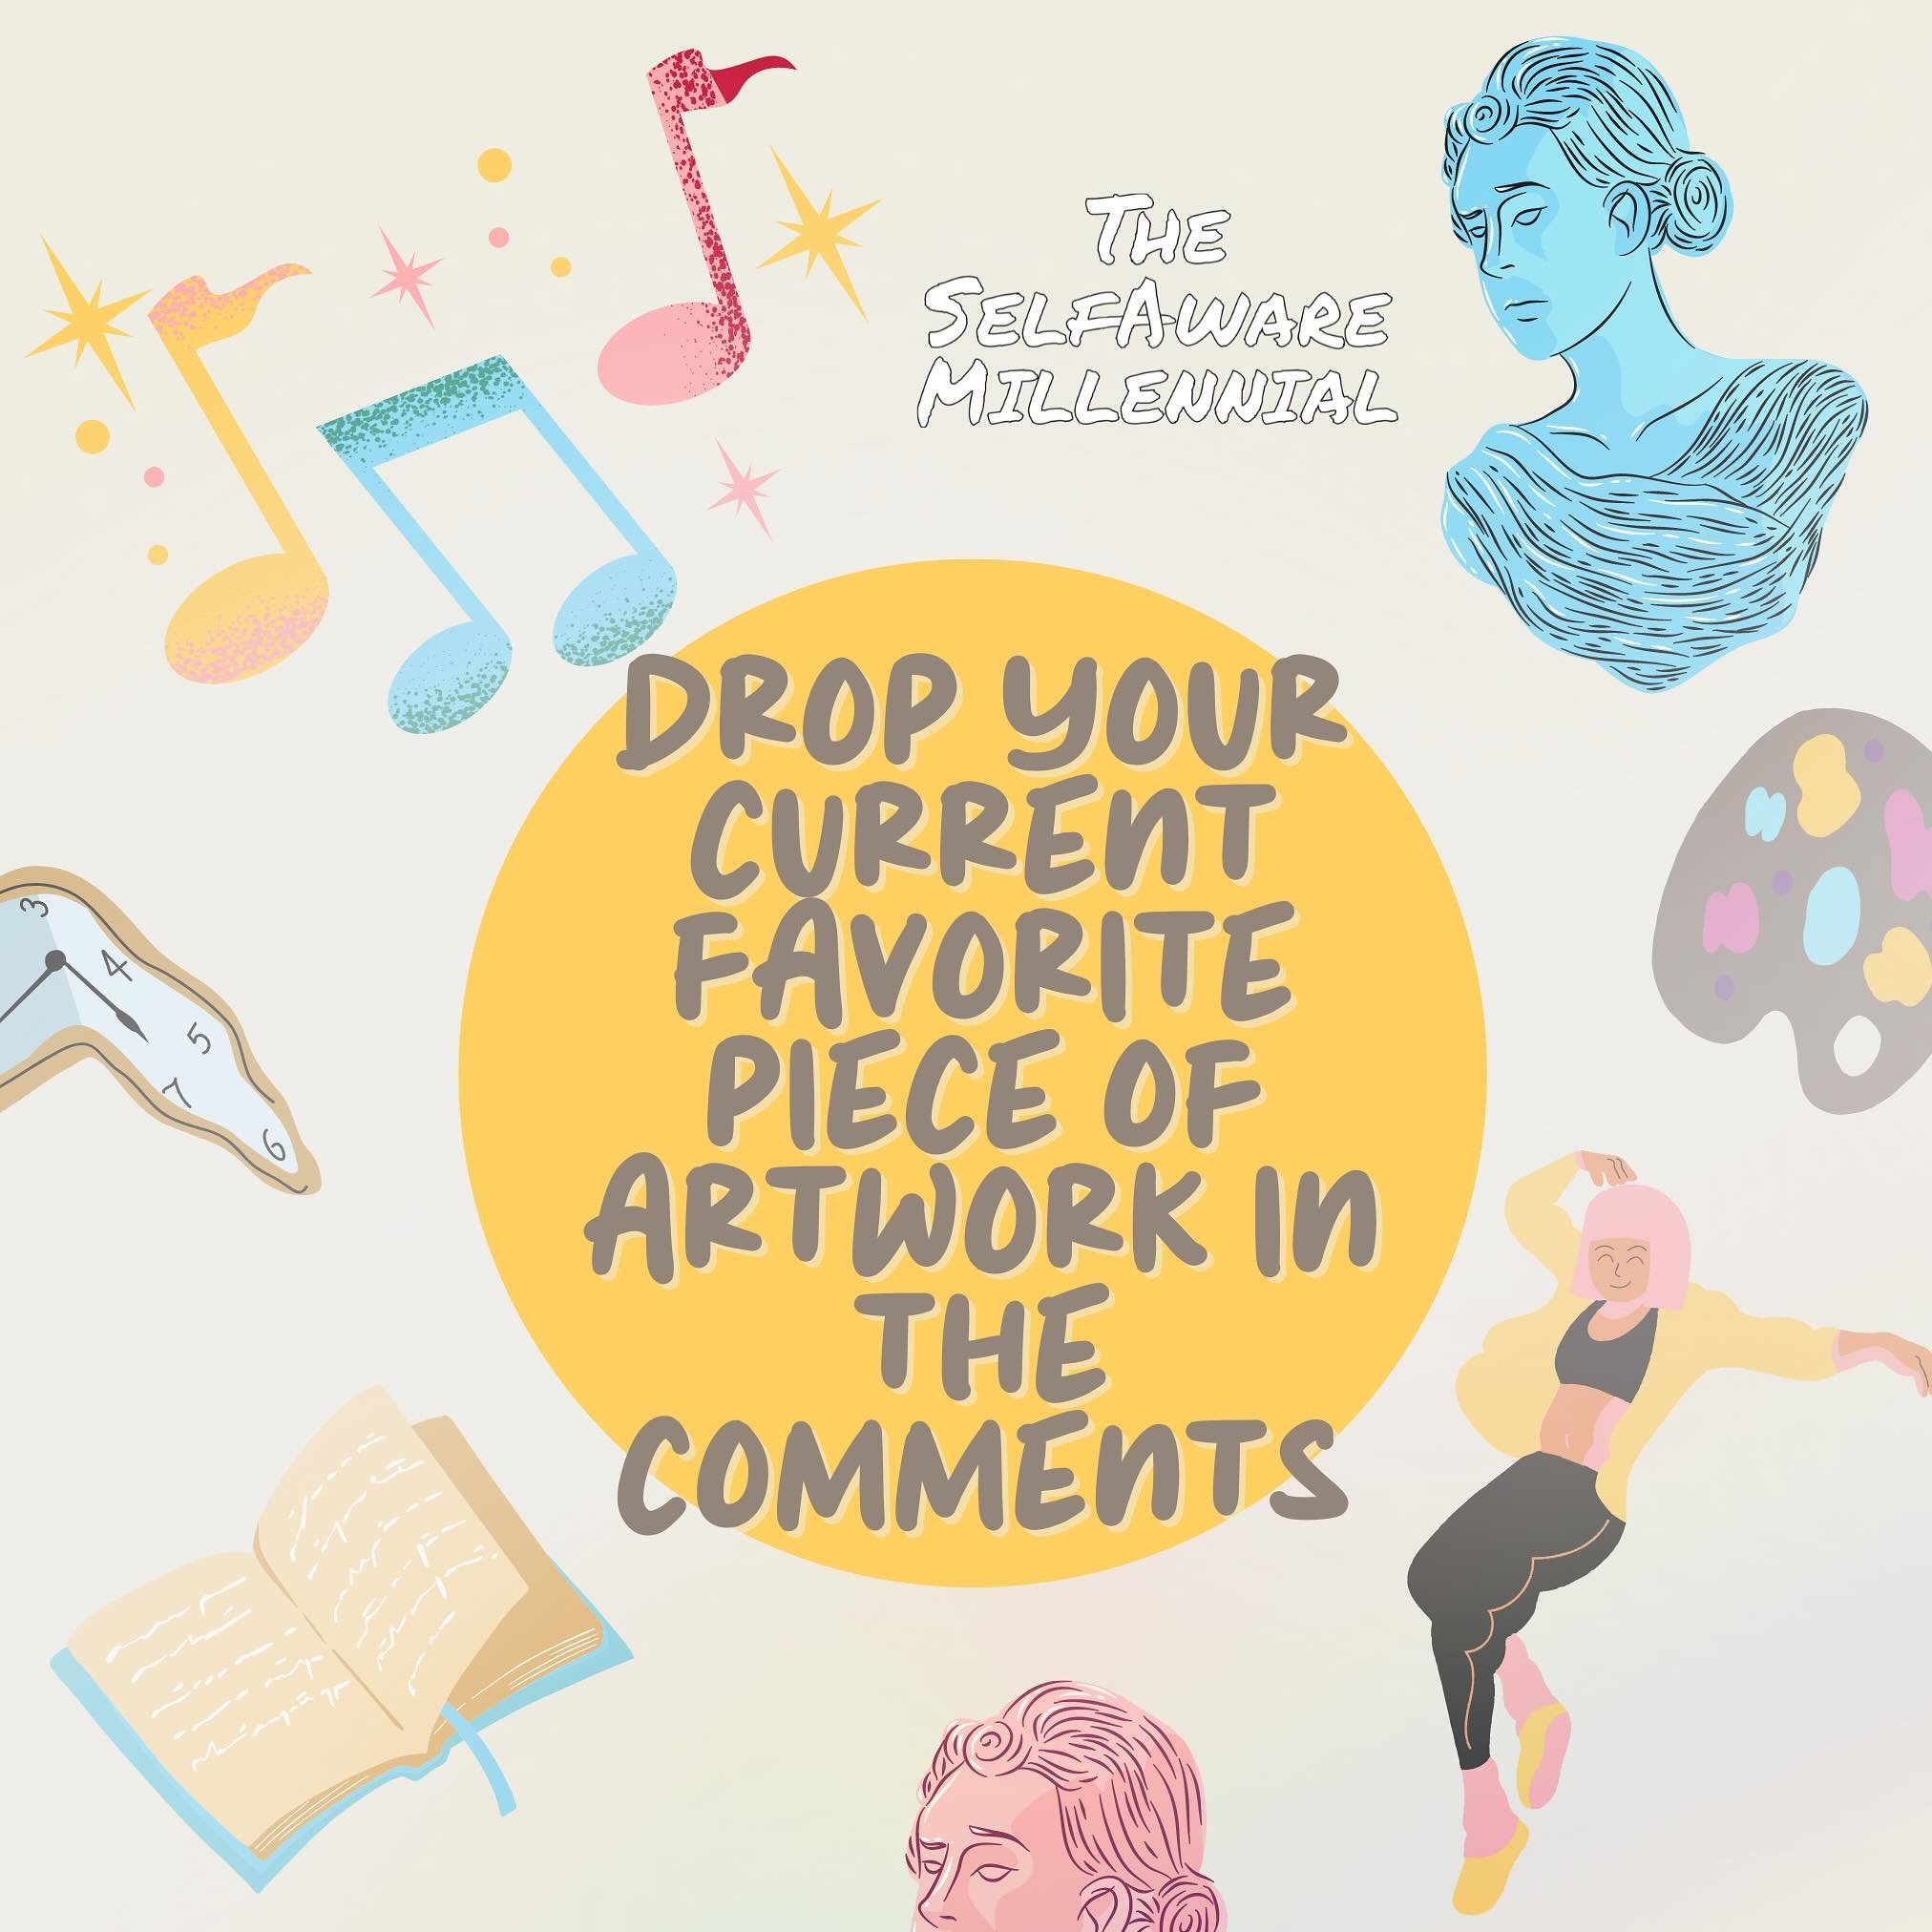 Let&rsquo;s share the magic of creativity! ✨ 

Drop your current favorite artwork &ndash; whether it&rsquo;s a captivating film, a soul-stirring song, a mesmerizing dance performance, or a thought-provoking book. Give something you never gave a chanc